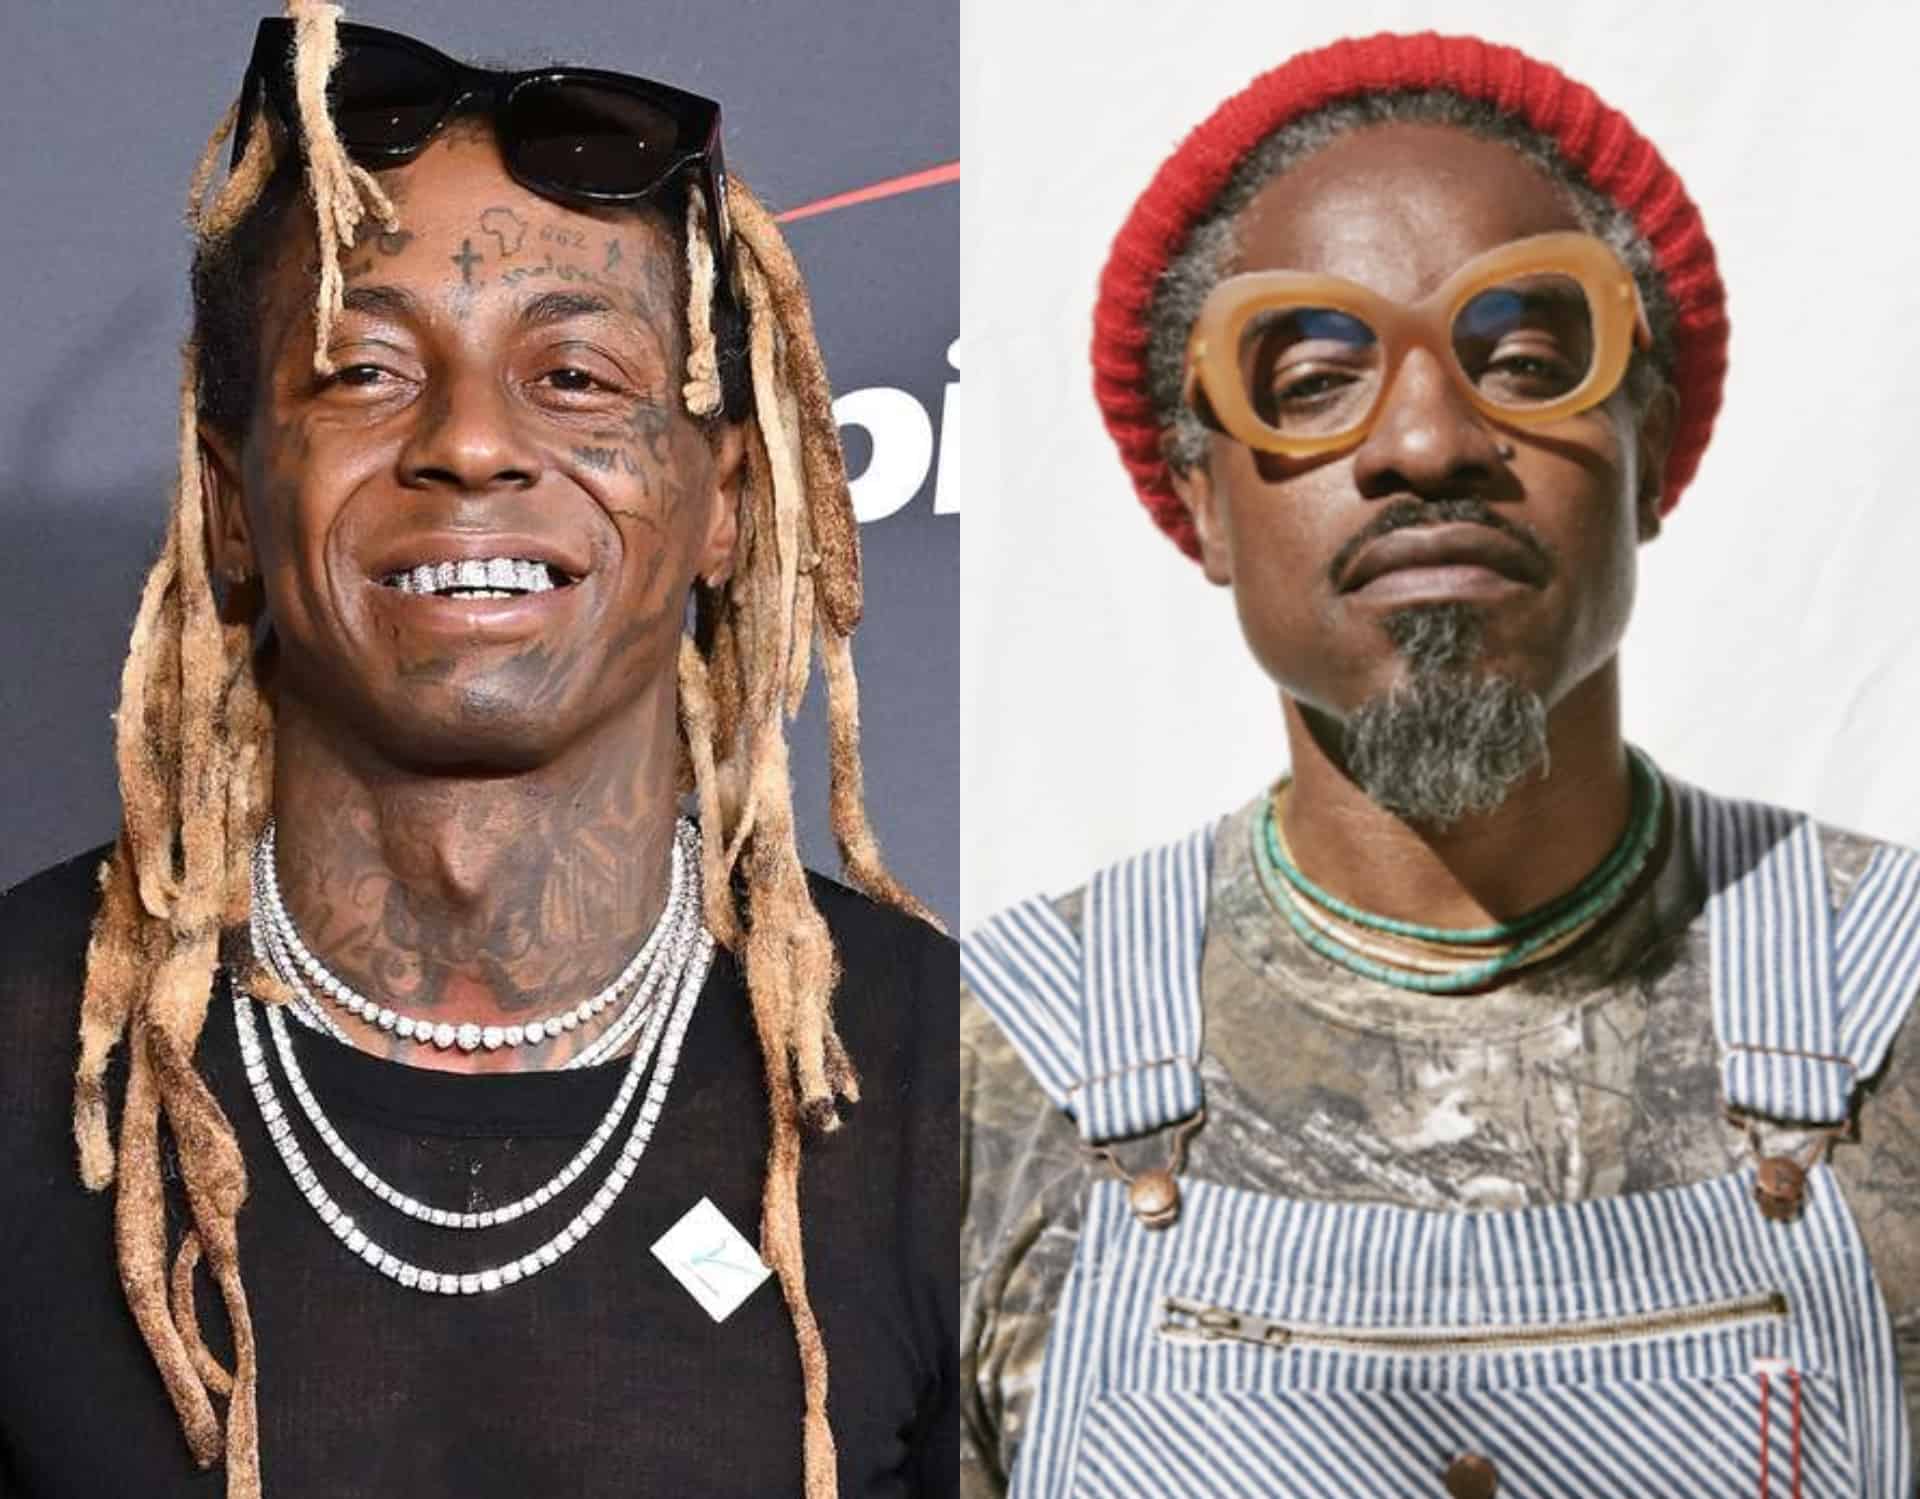 Lil Wayne Reacts To Depressing Andre 3000 Remarks About Rapping Over 40